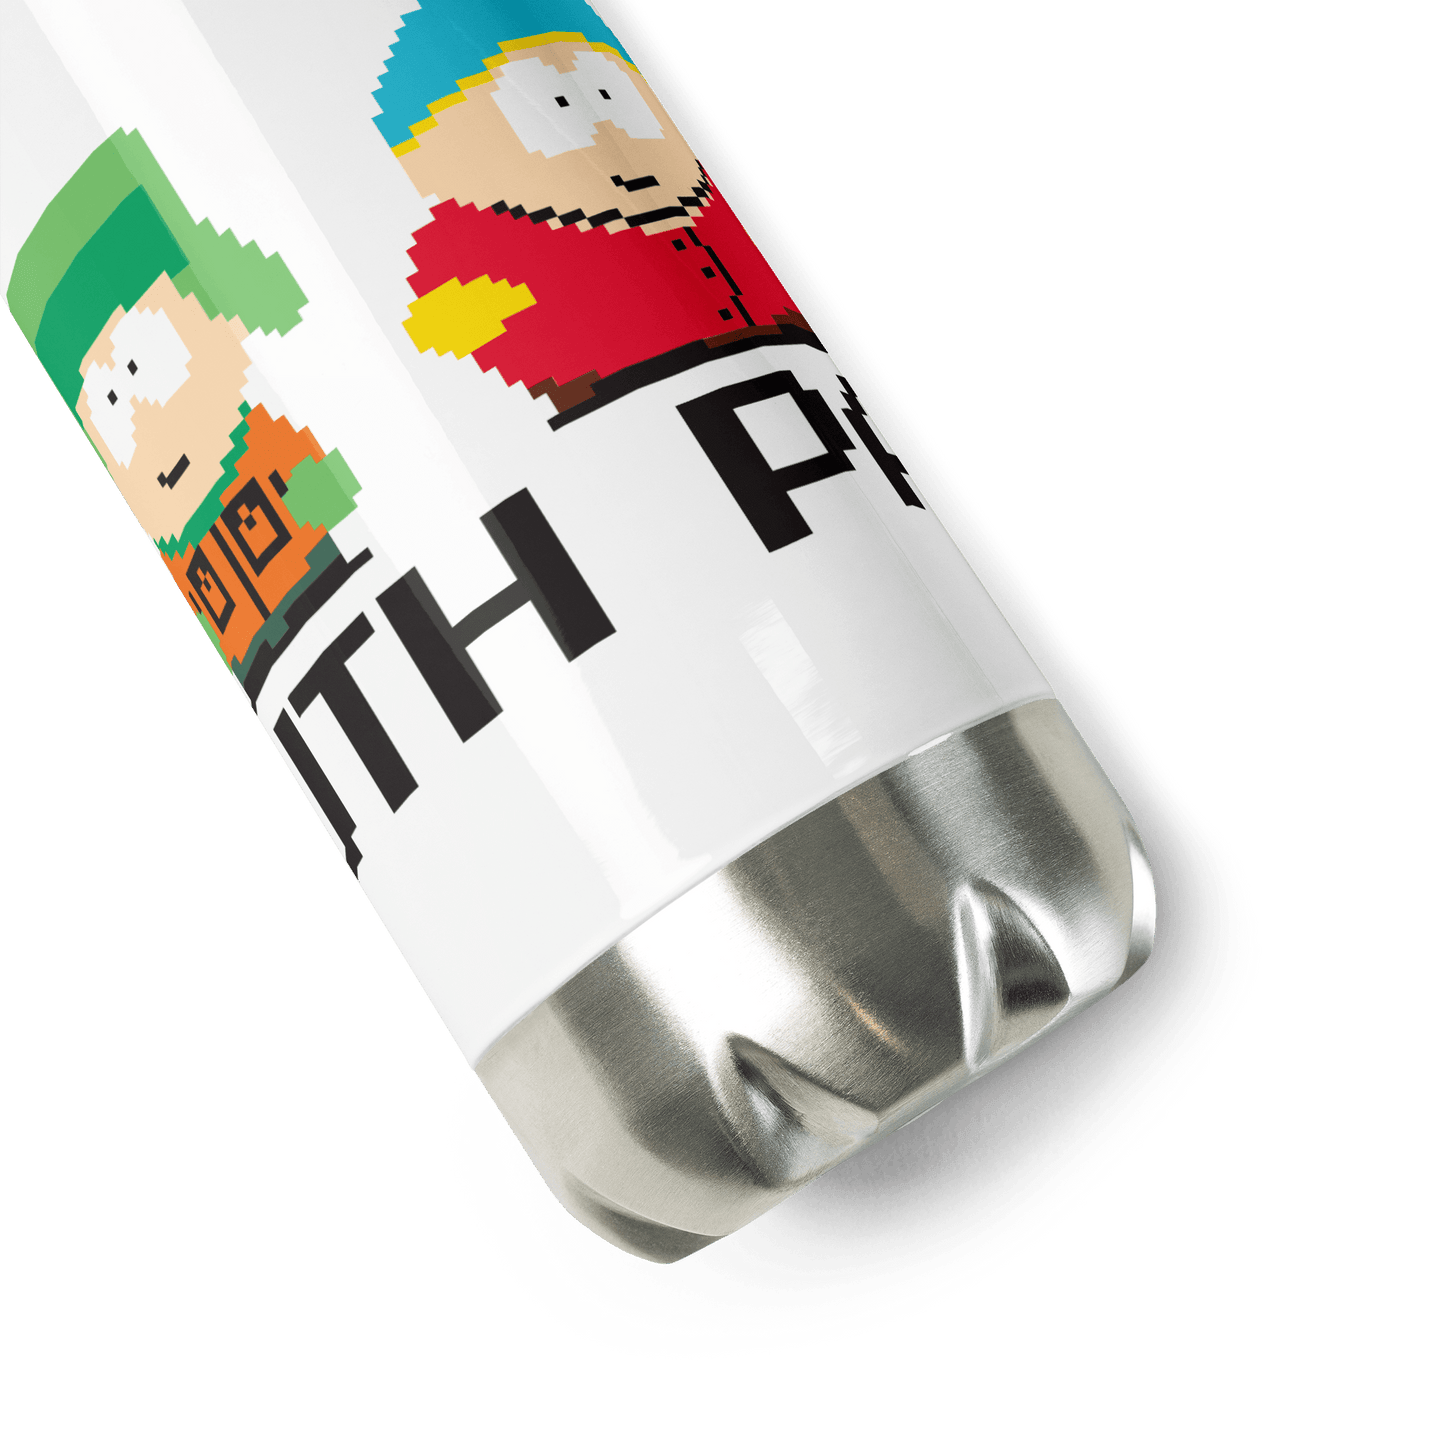 South Park 8 Bit Characters Stainless Steel Water Bottle - Paramount Shop